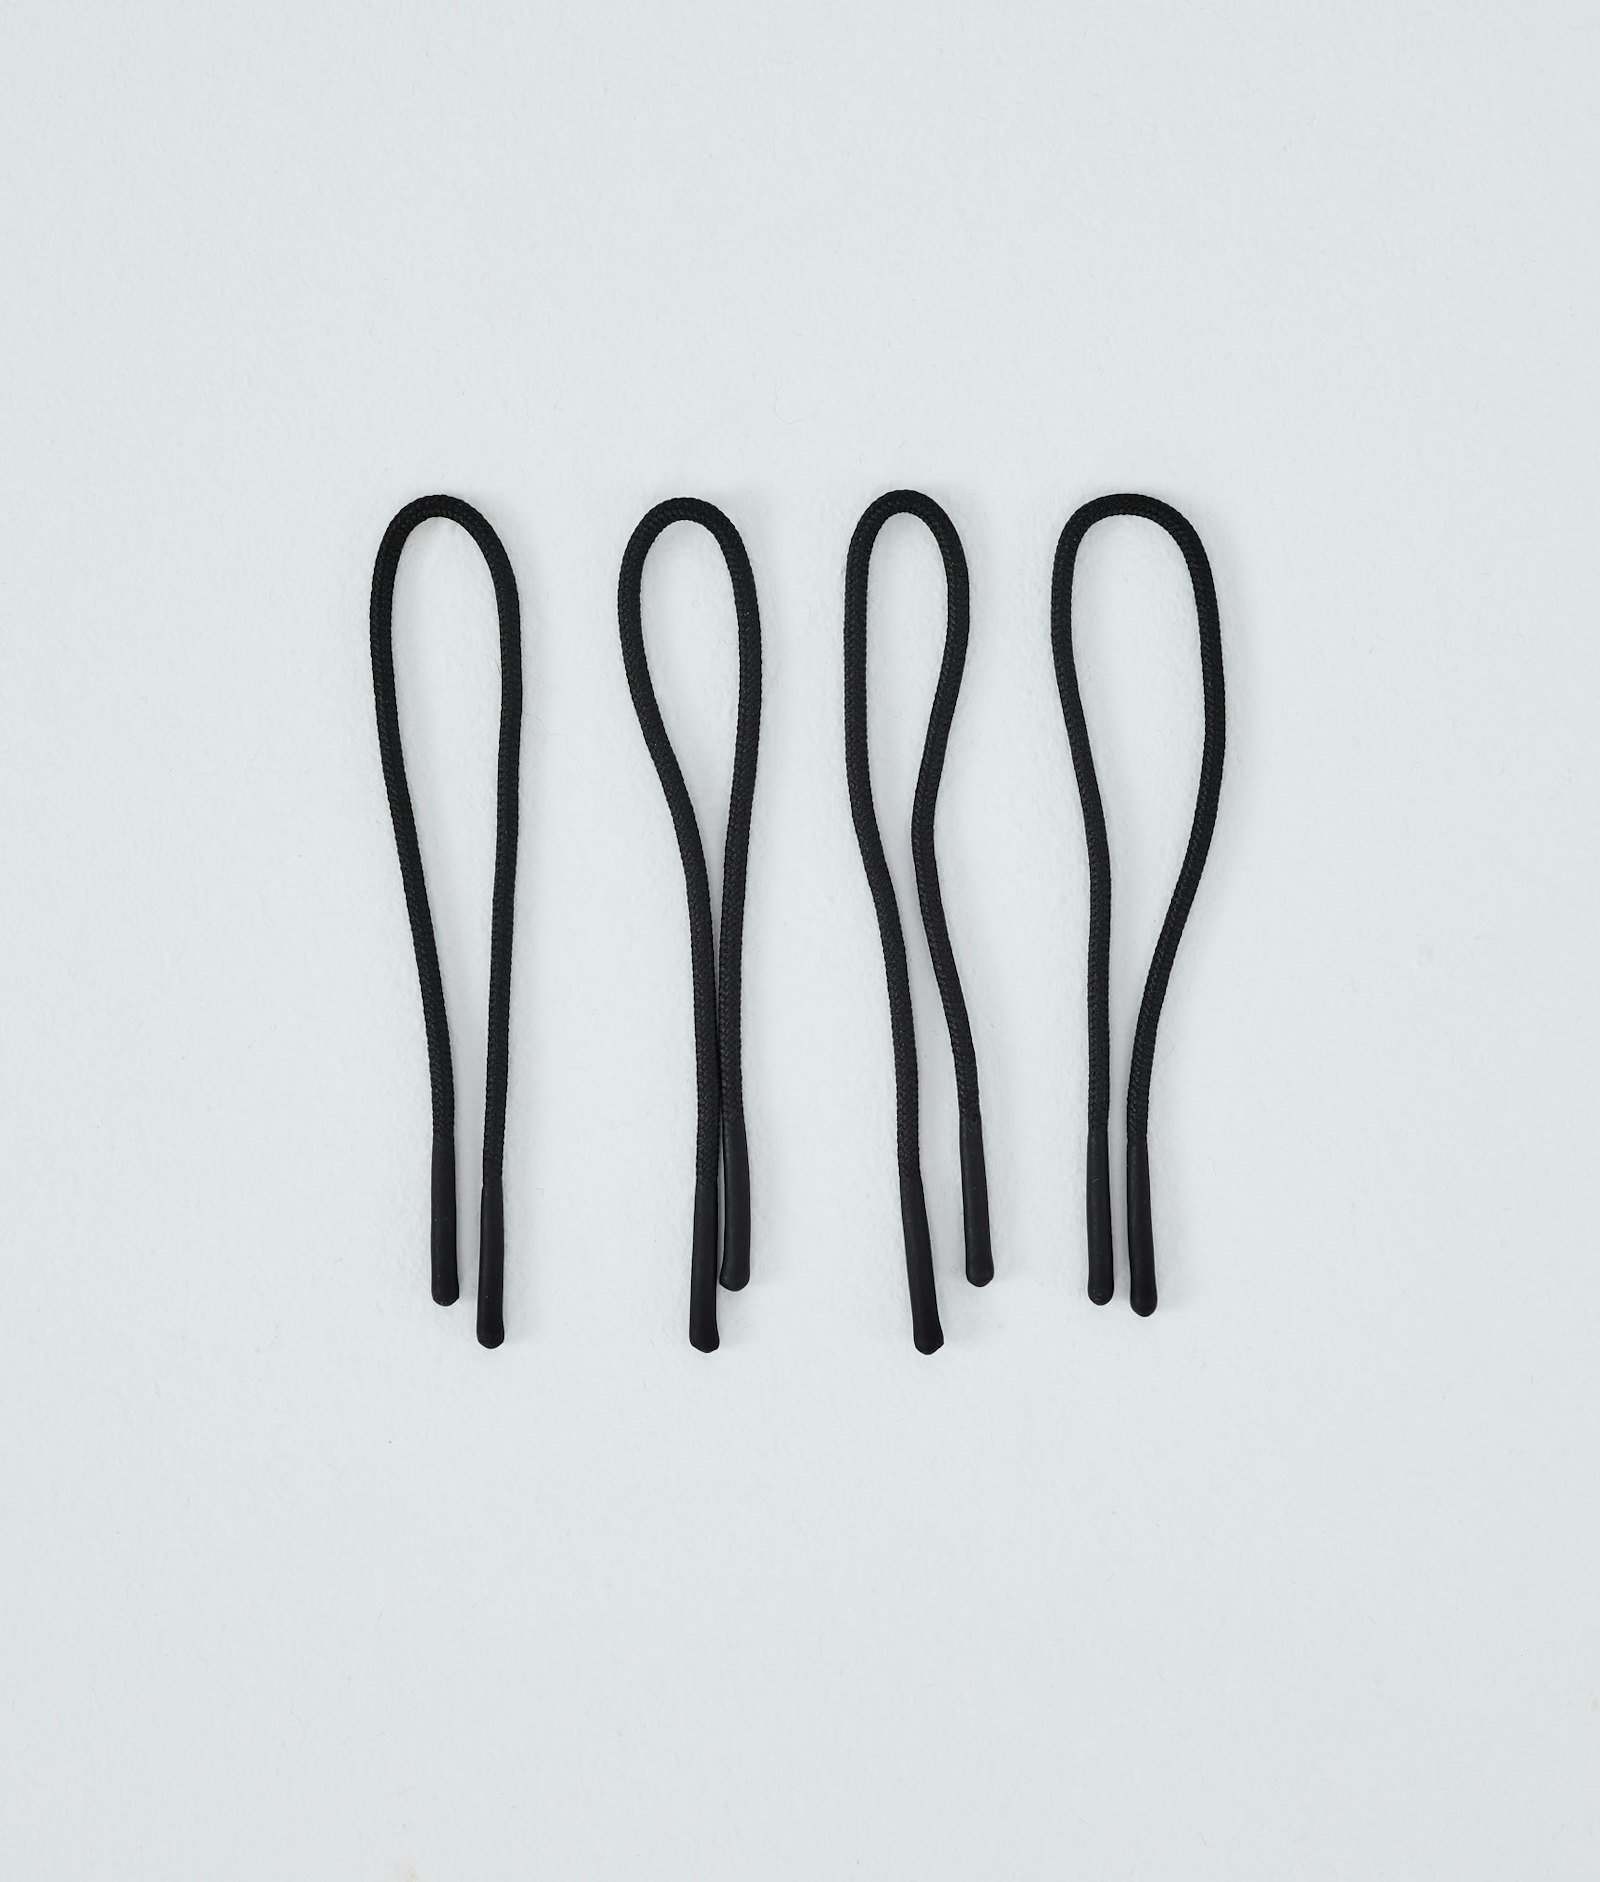 Round Zip Puller String Replacement Parts Black/Black Tip, Image 1 of 2